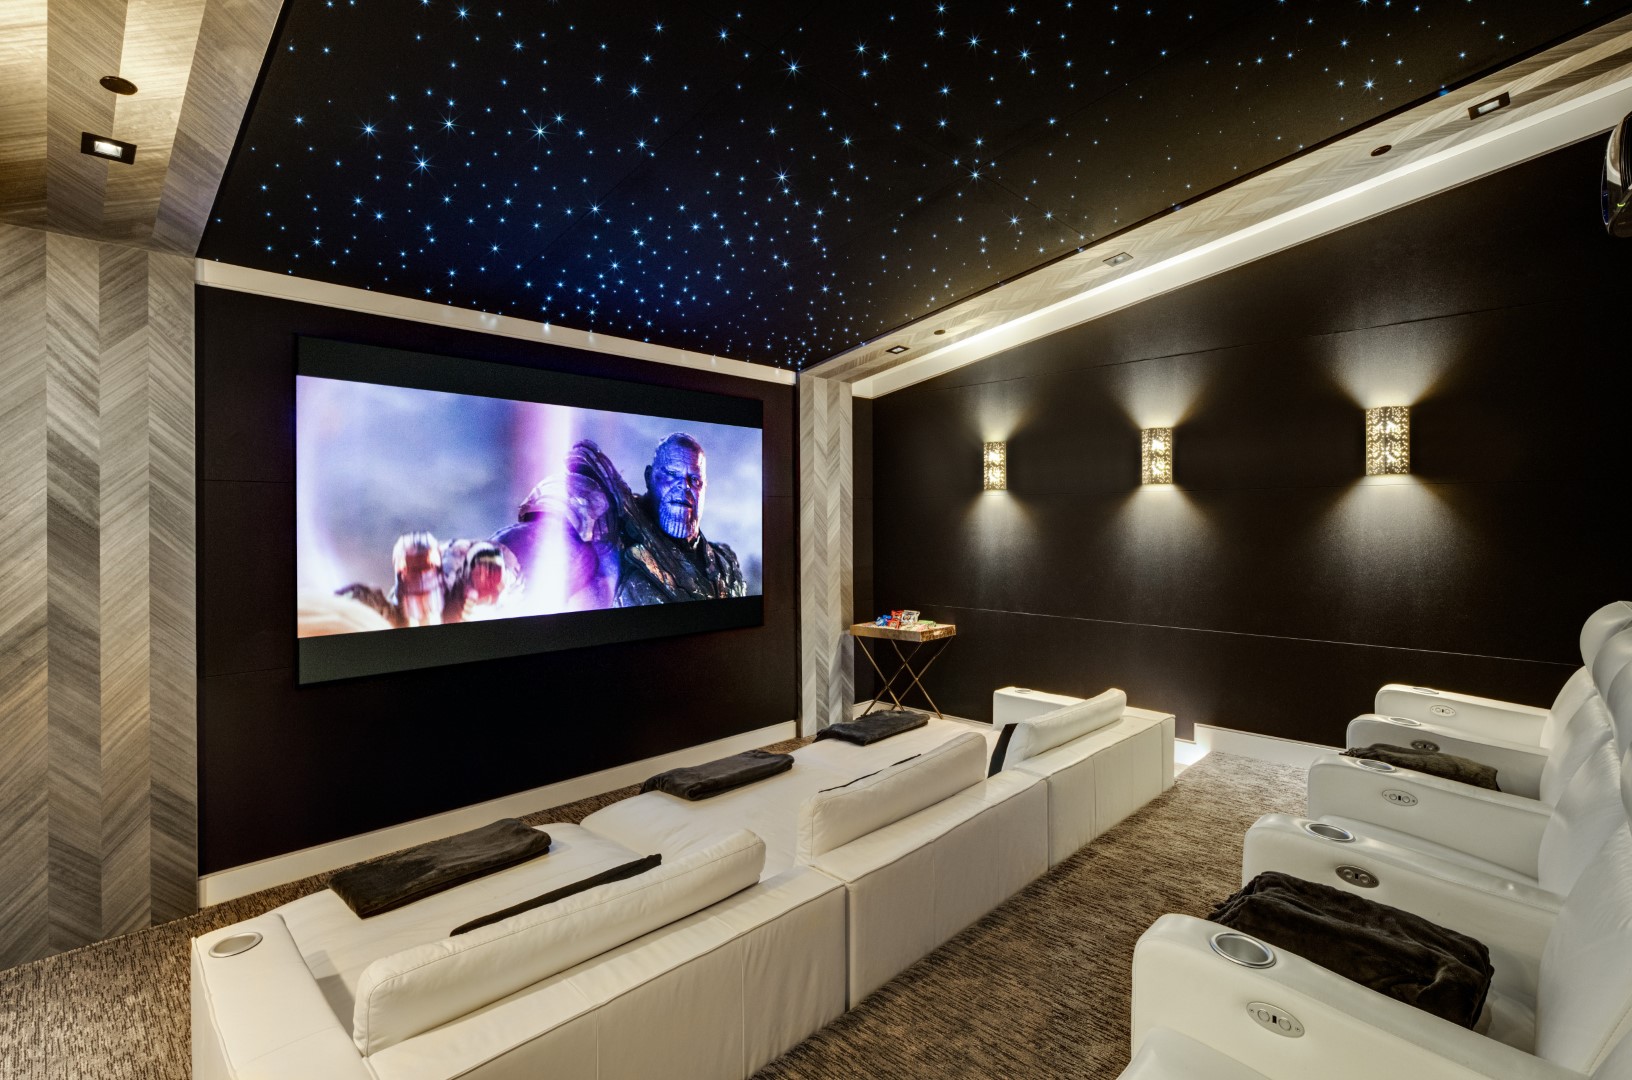 16 Deluxe Contemporary Home Theater Designs That Will Make An Impression